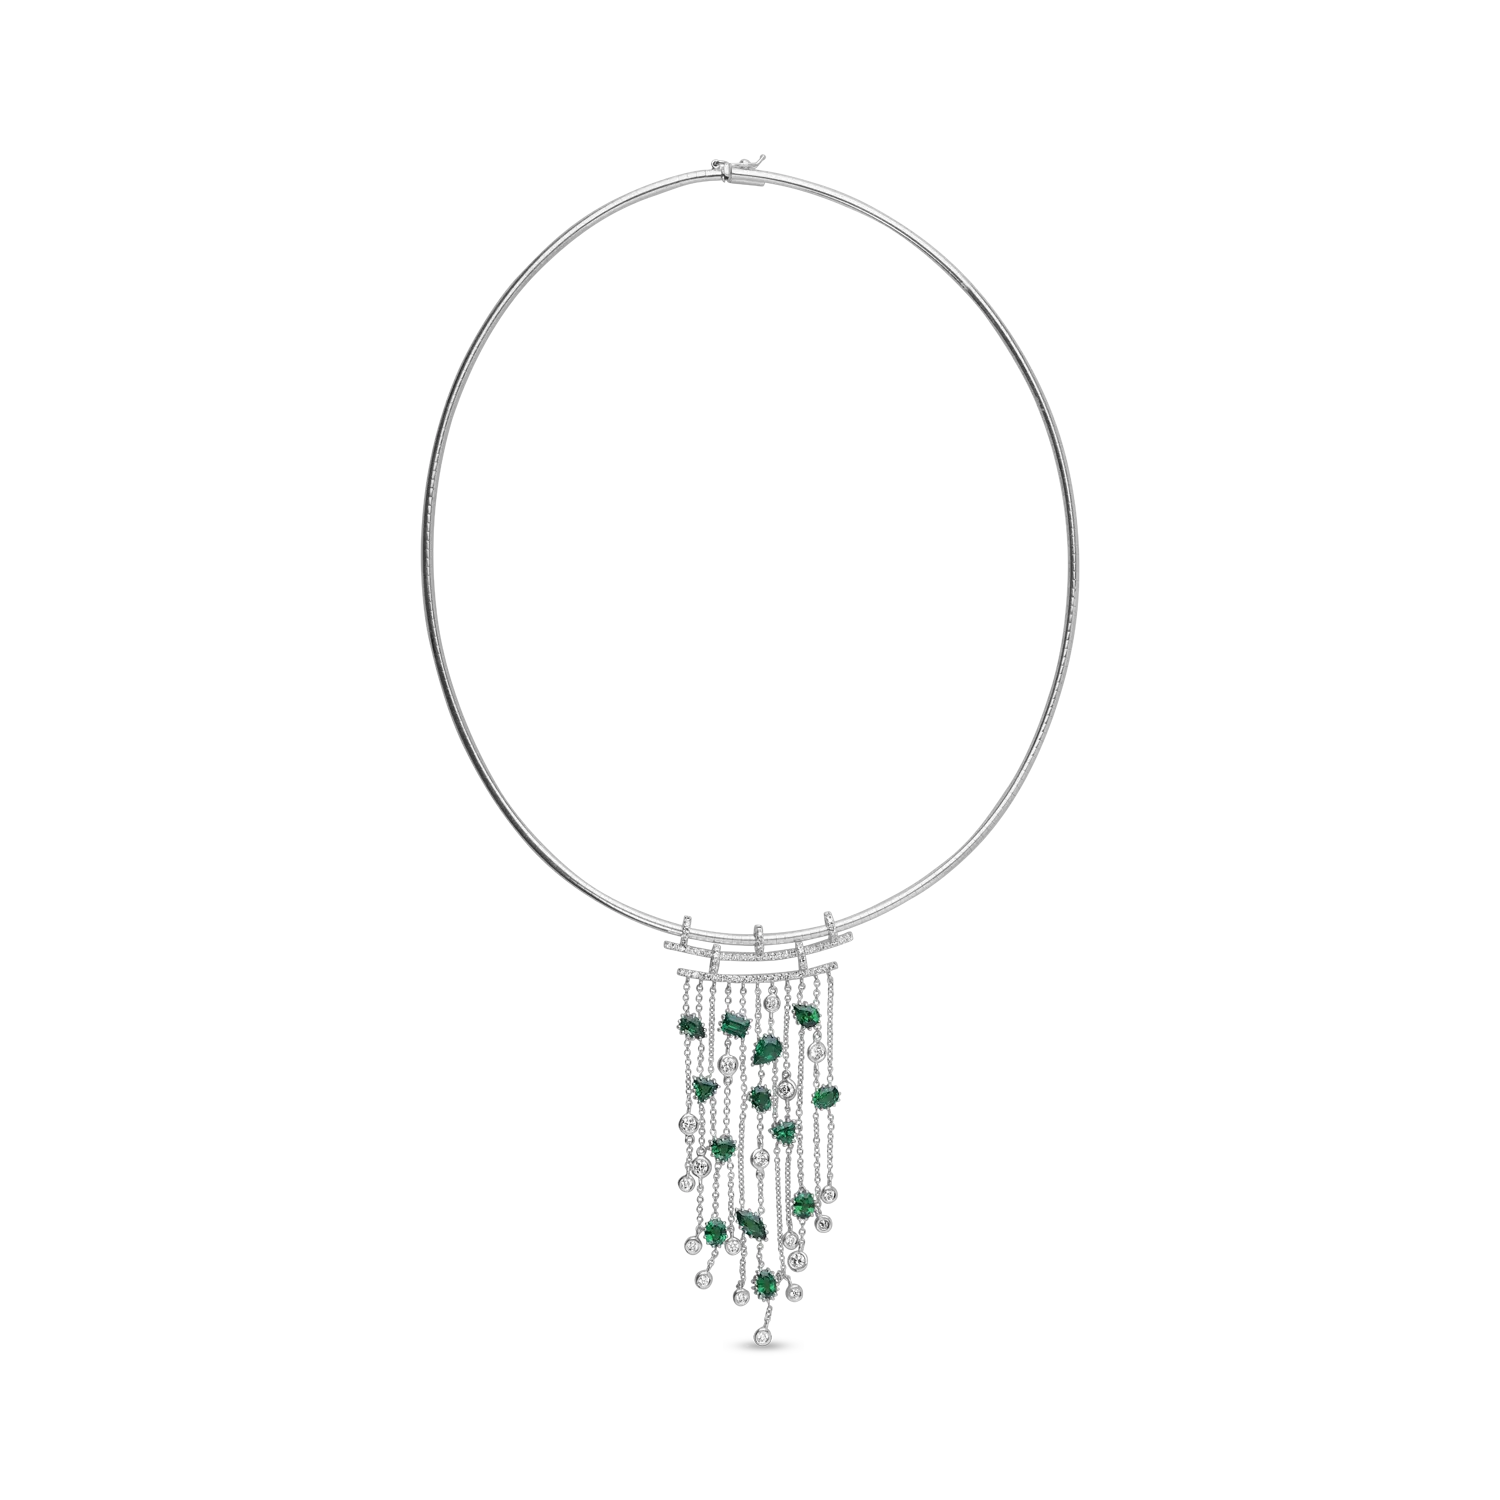 18K white gold pendant chain with 4.84ct green grenades and 1.5ct diamonds